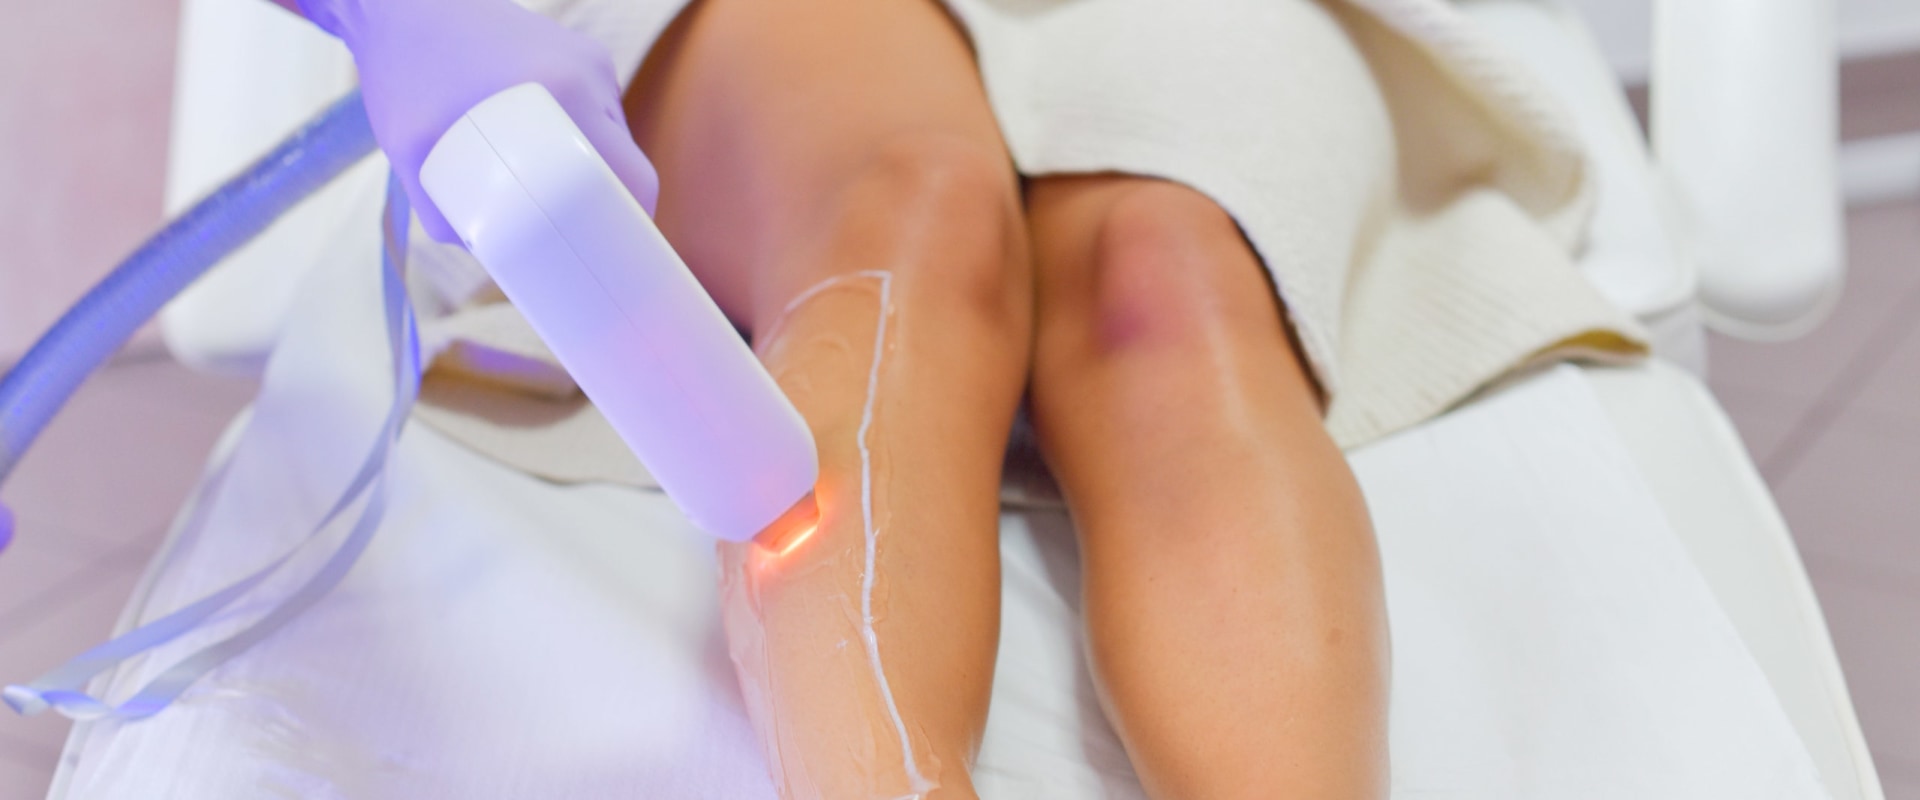 Is Laser Hair Removal Safe for All Skin Types? - An Expert's Perspective